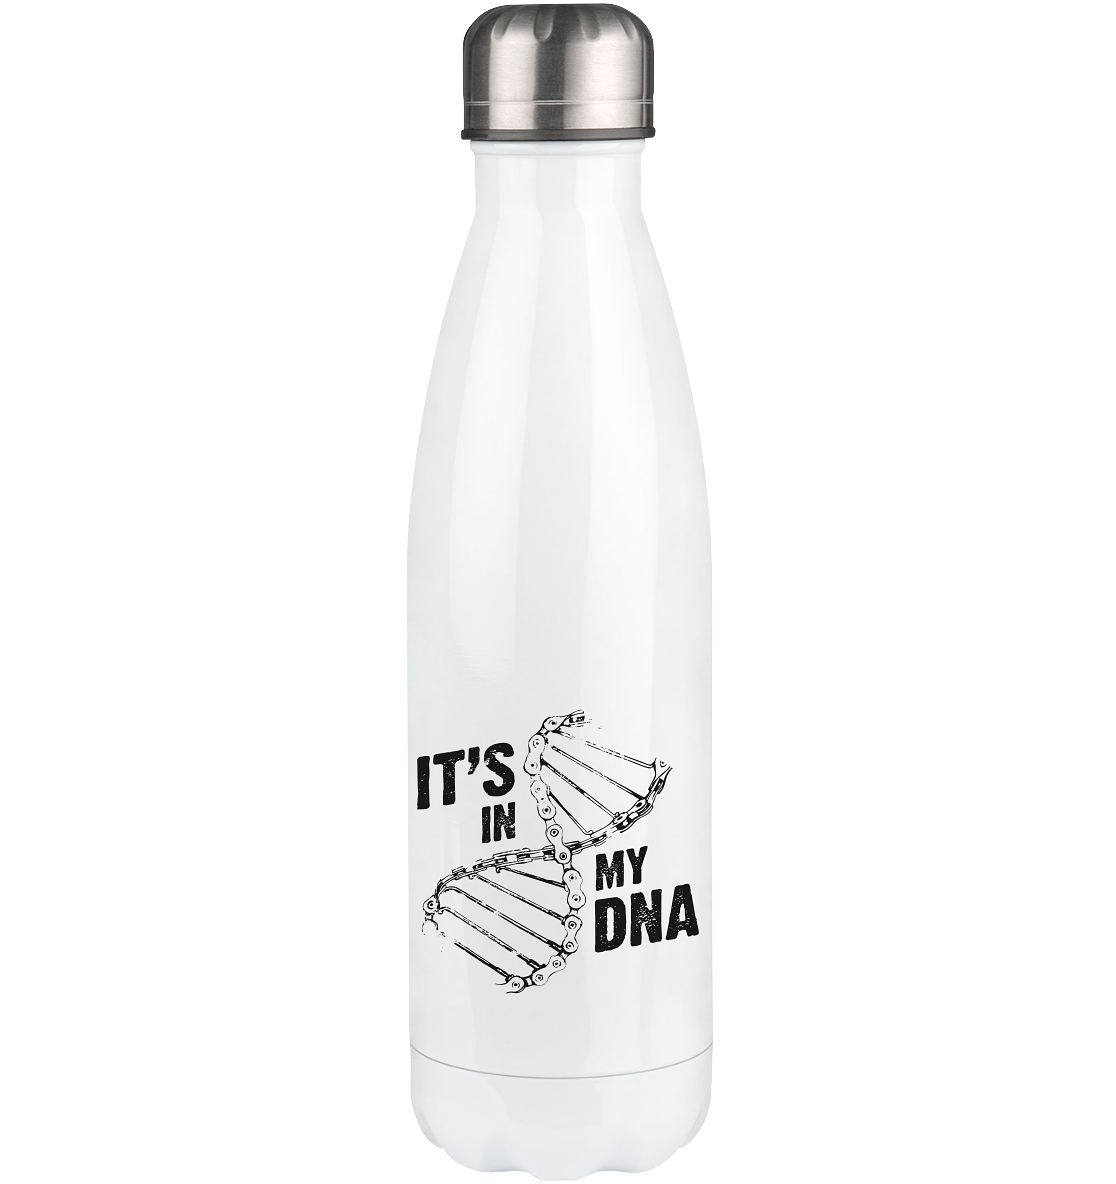 Its in my DNA - Edelstahl Thermosflasche fahrrad mountainbike 500ml